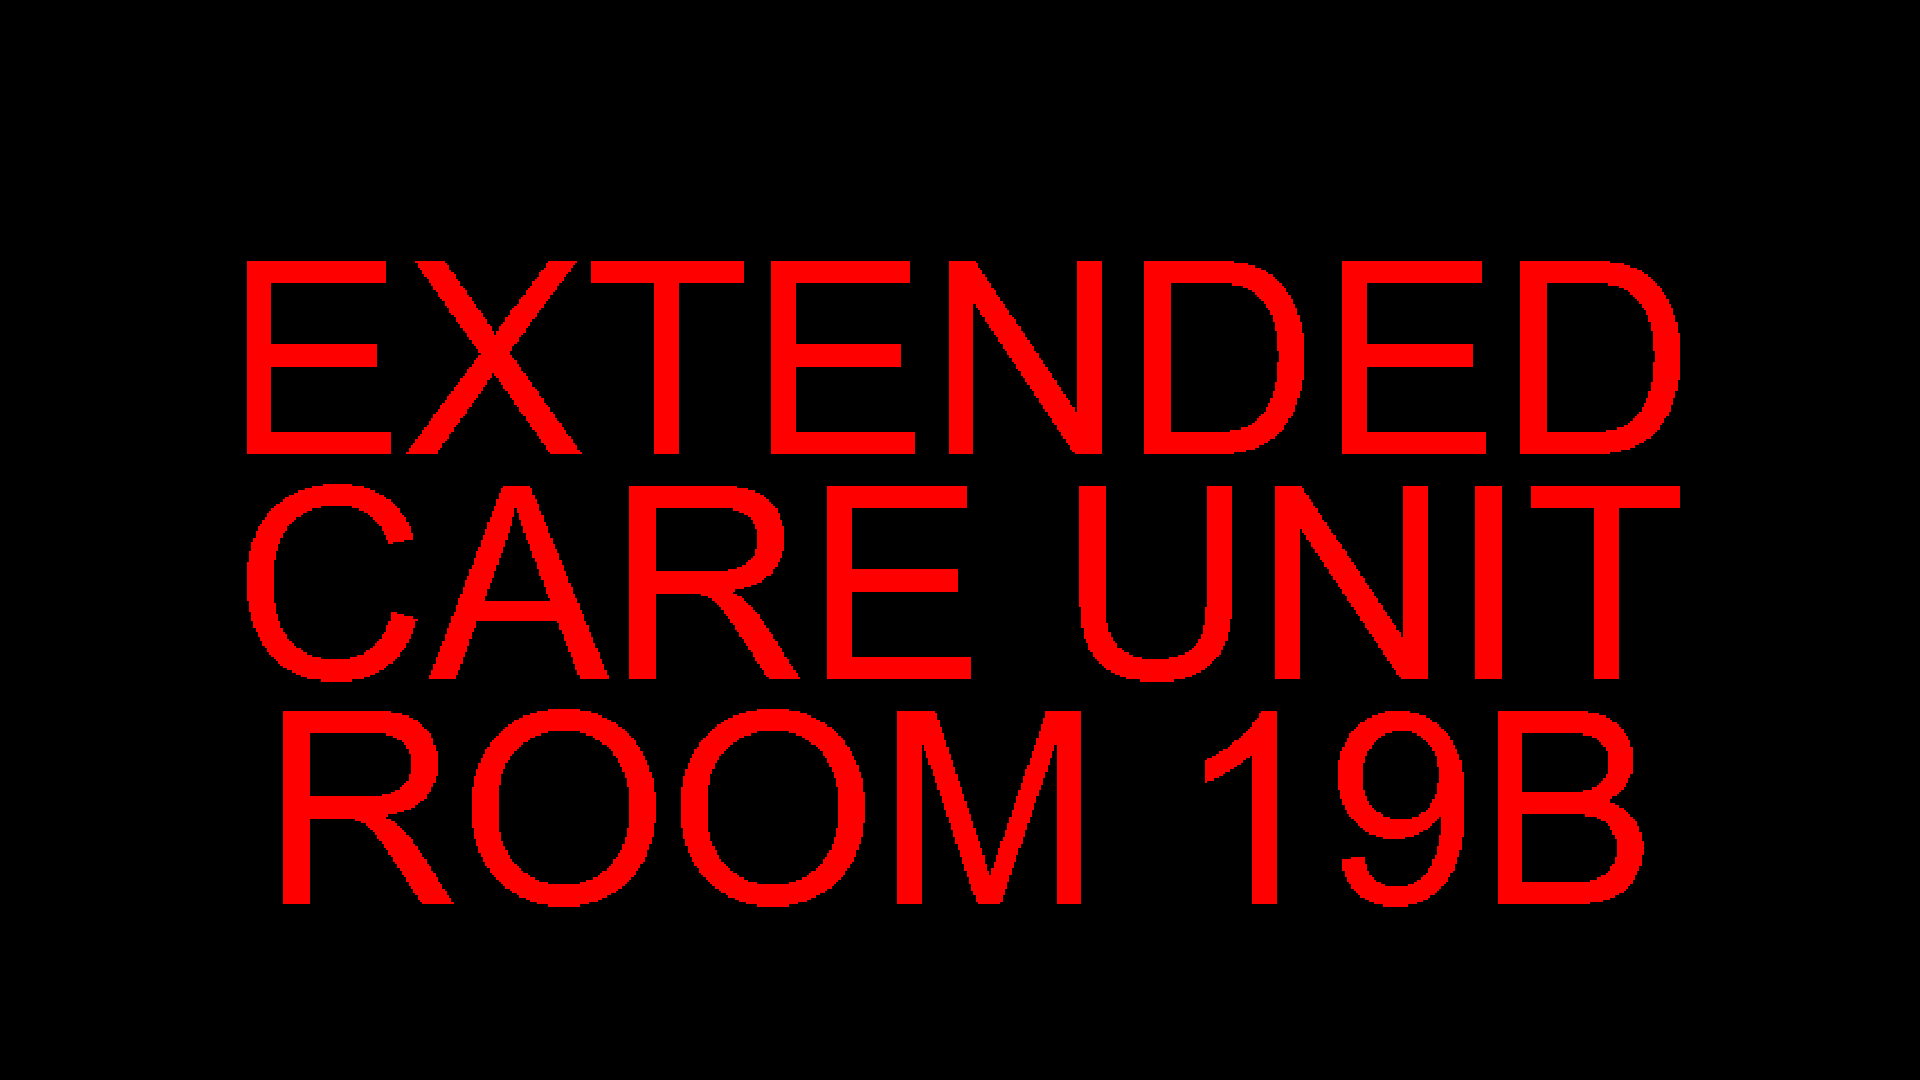 EXTENDED CARE UNIT ROOM 19B